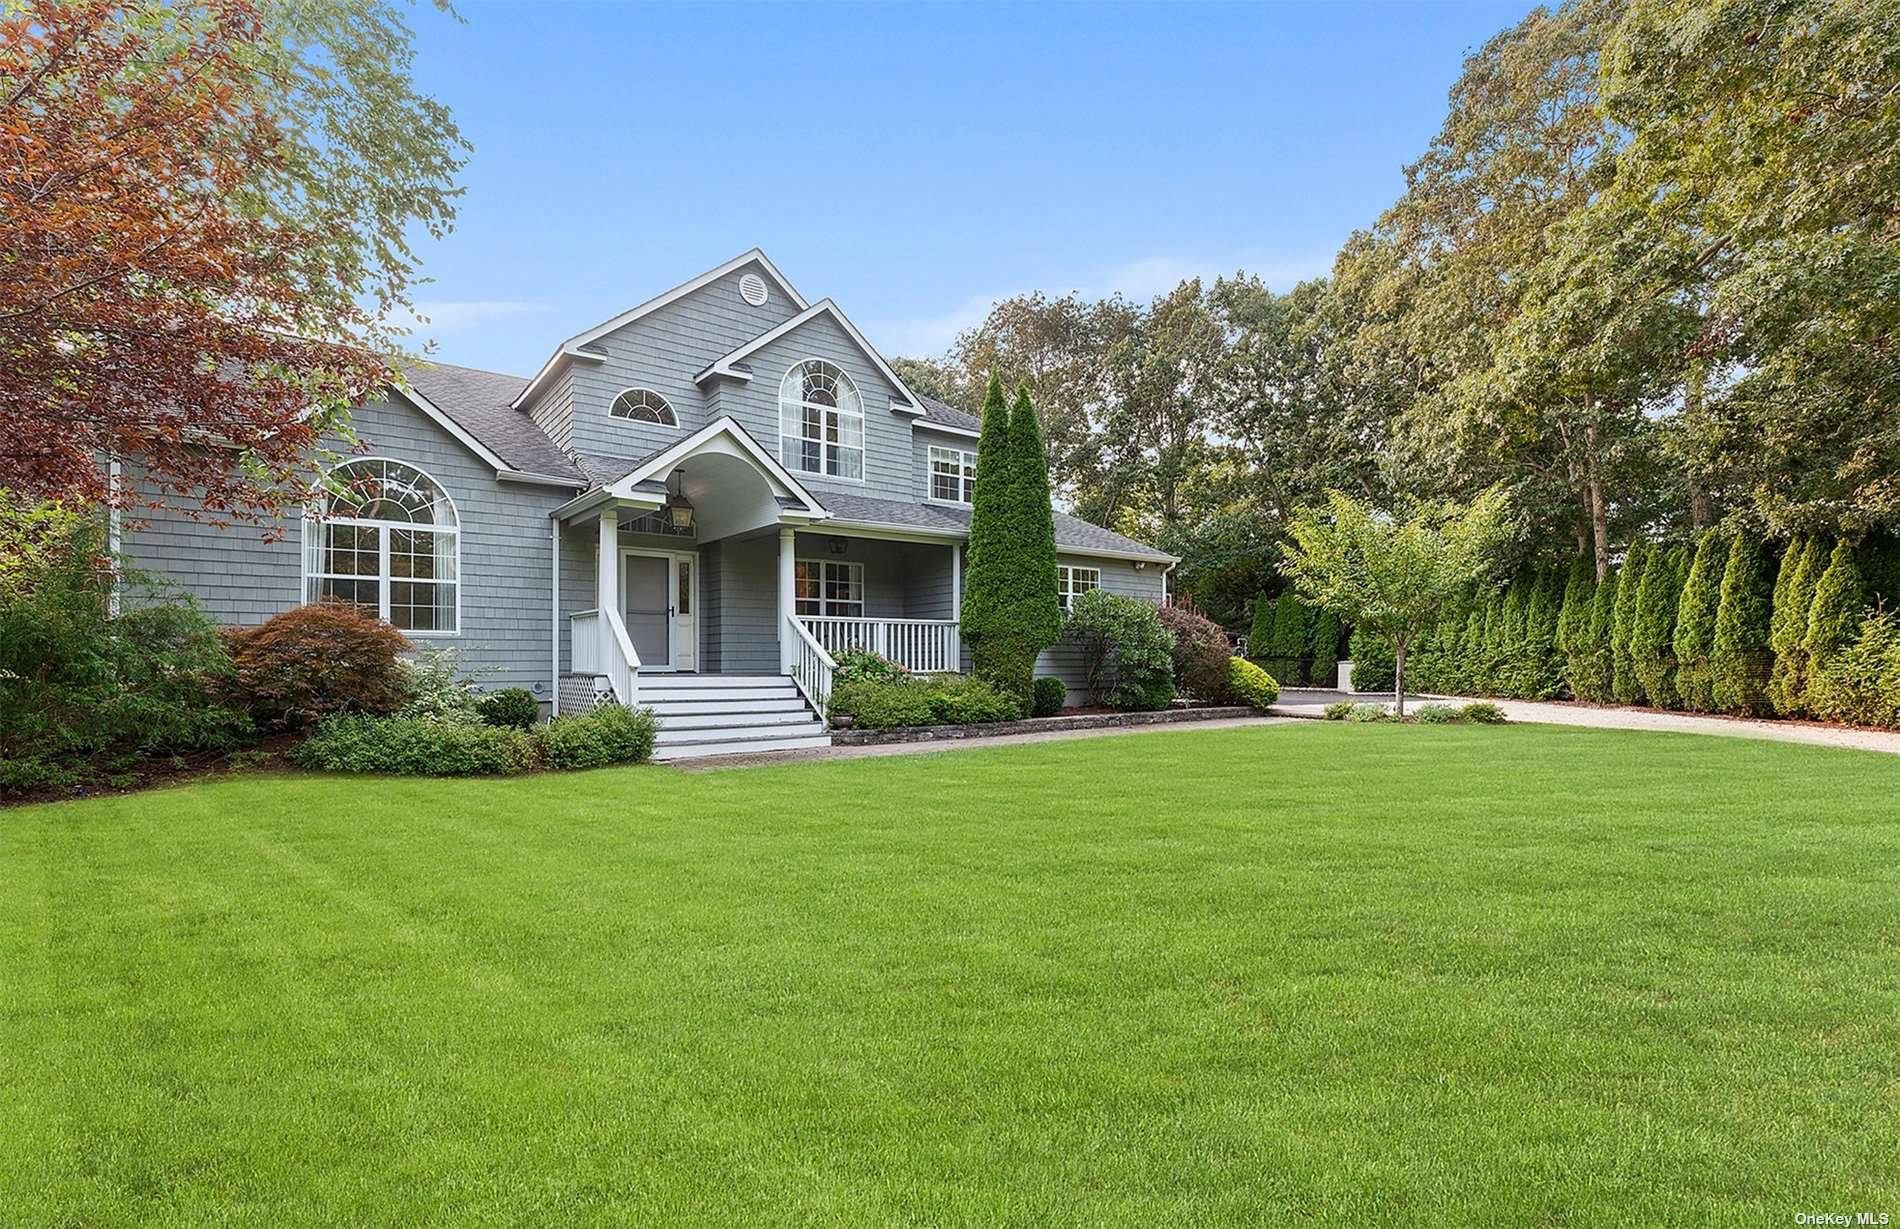 Down a long private driveway, sits this recently renovated Post Modern home with beautifully landscaped grounds offer 1.